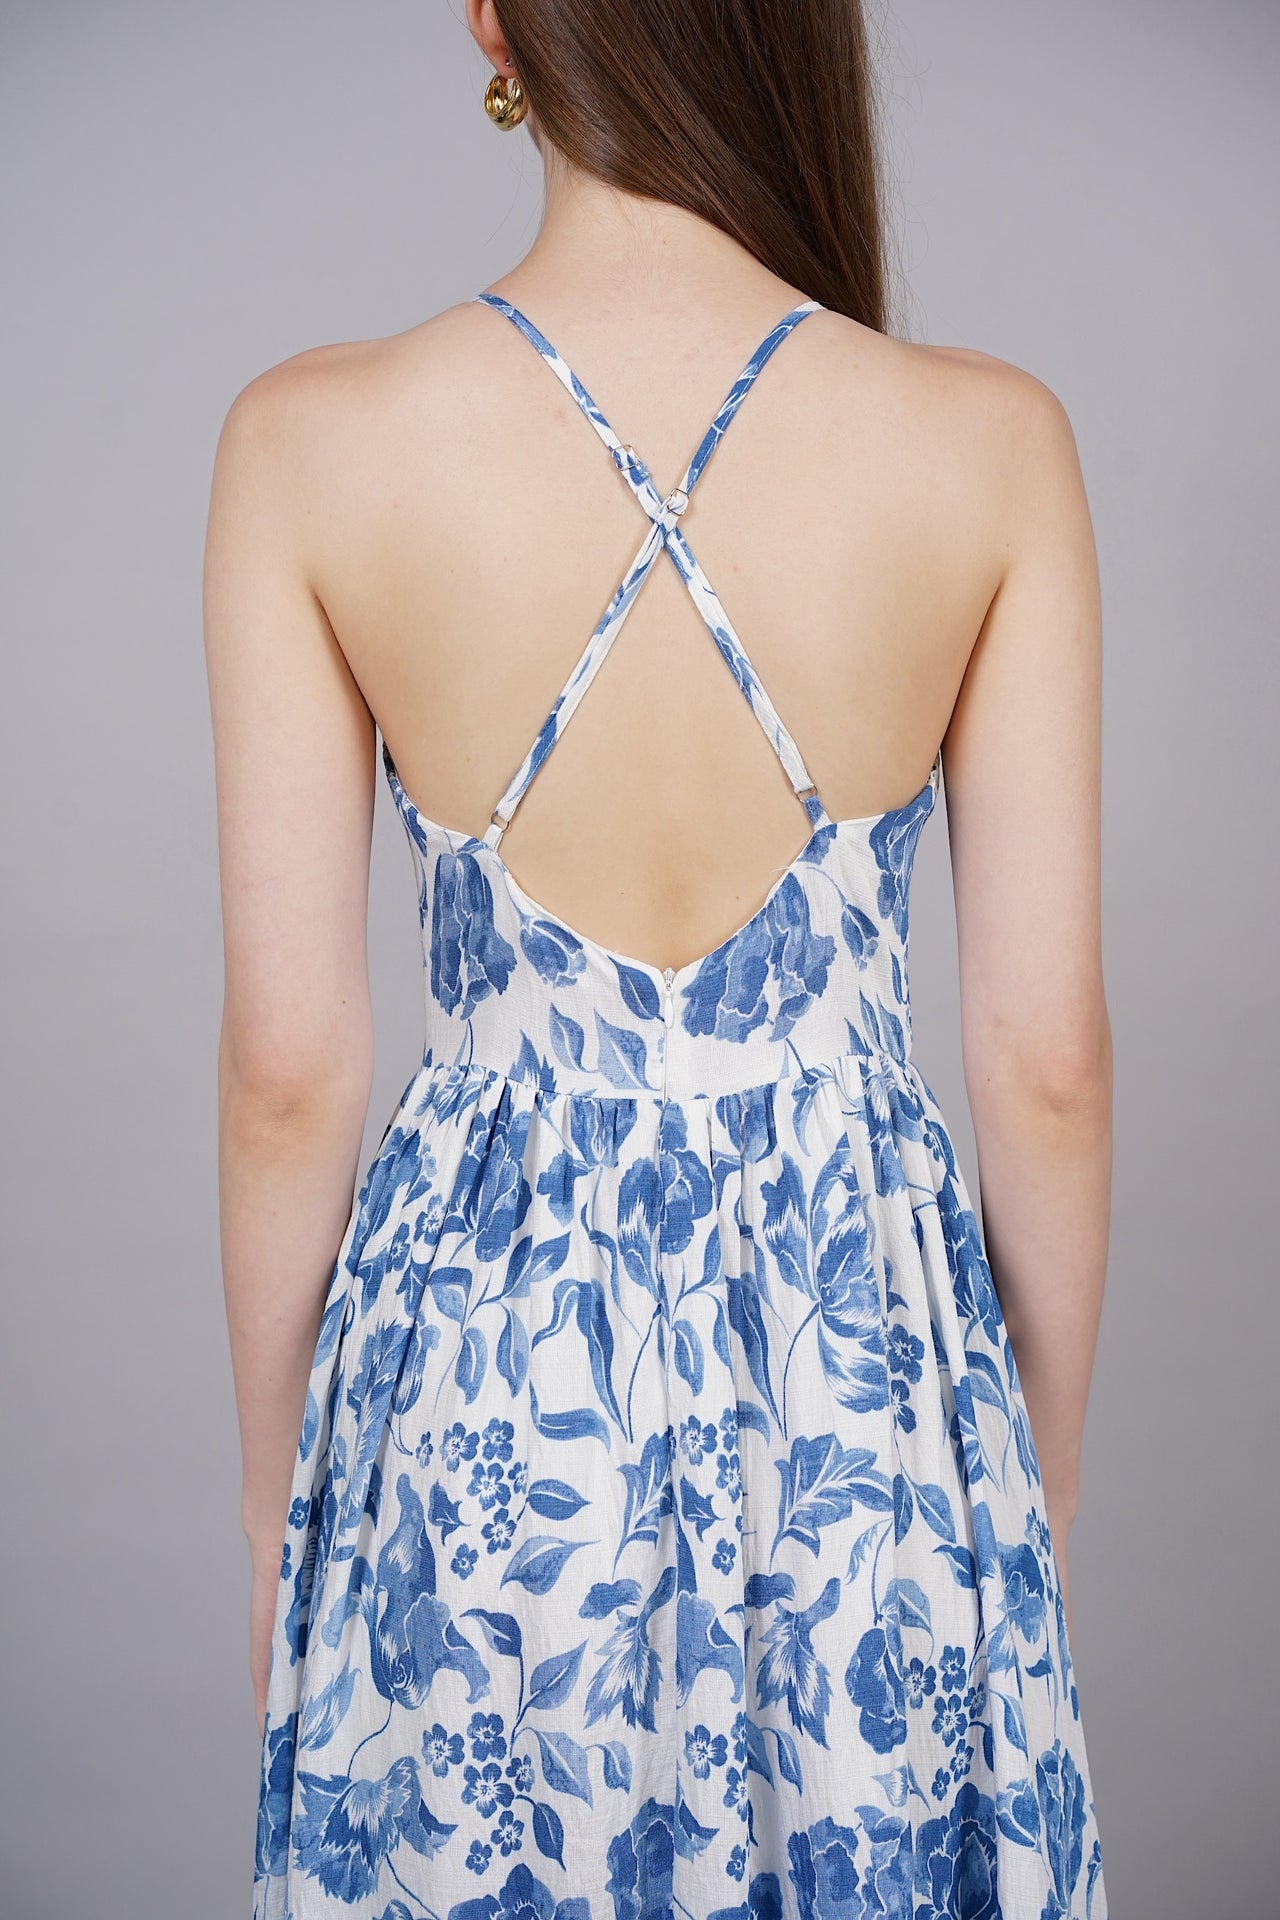 Gathered Midi Dress in Blue Floral - Arriving Soon